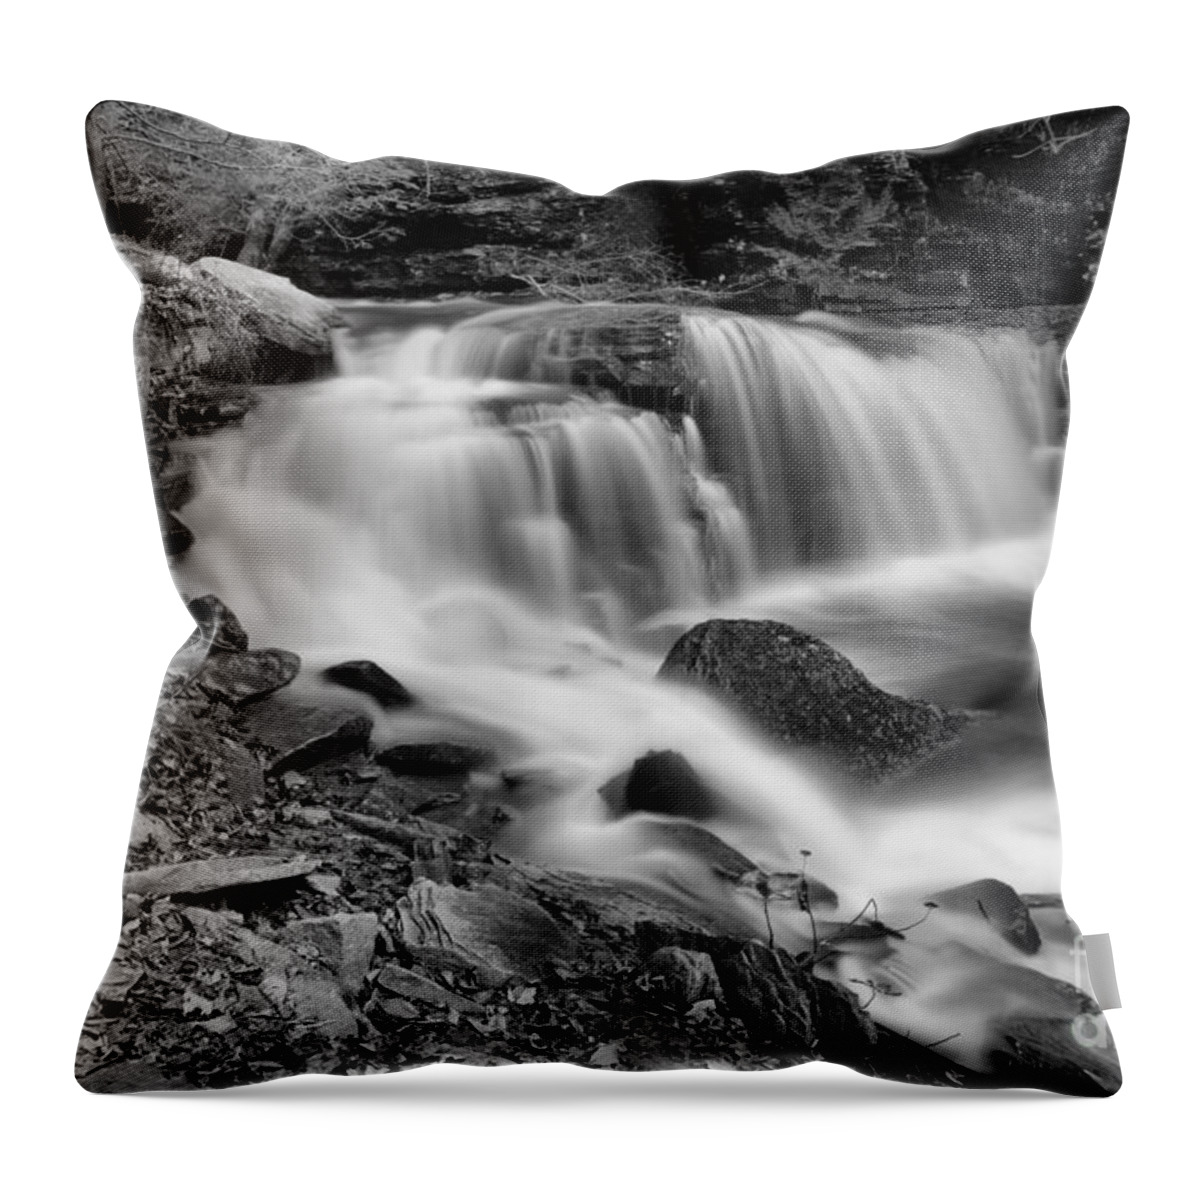 Ganoga Glen Throw Pillow featuring the photograph Cayuga Falls Autumn View Black And White by Adam Jewell